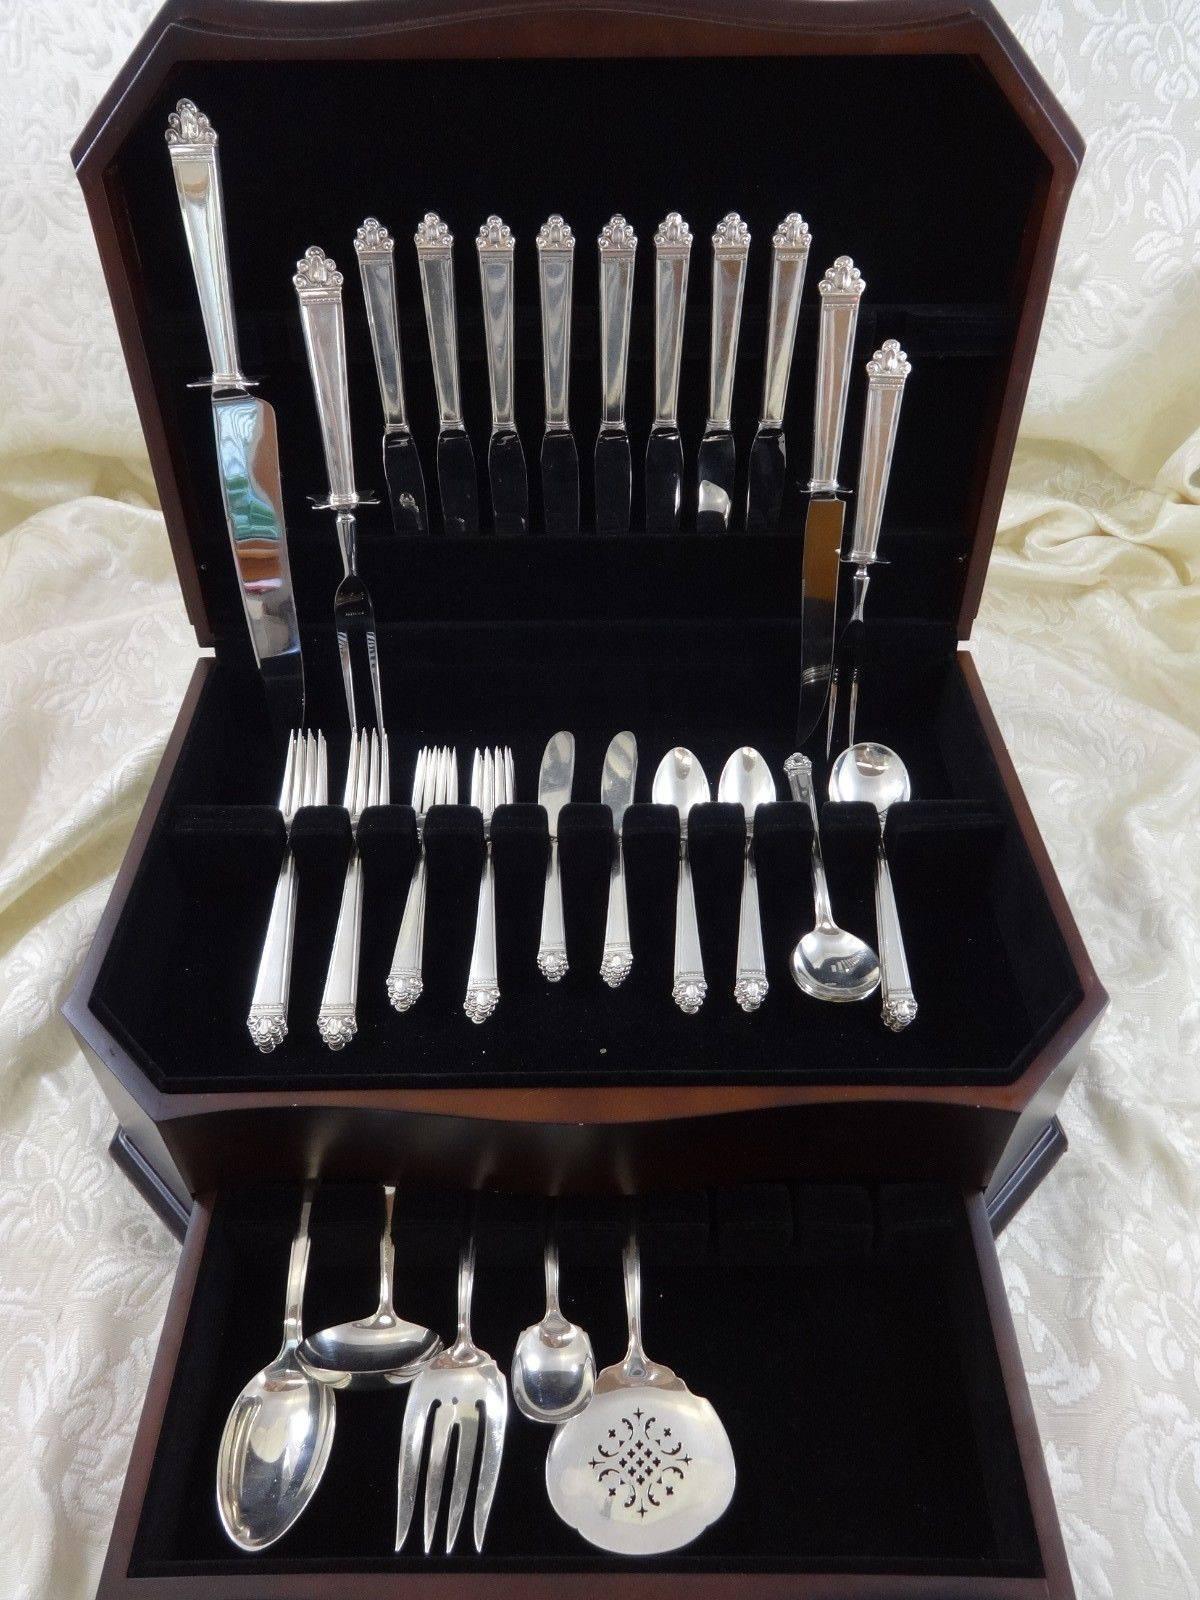 Lovely Juliana by Watson sterling silver flatware set of 57 pieces. This set includes:

Eight knives, 9